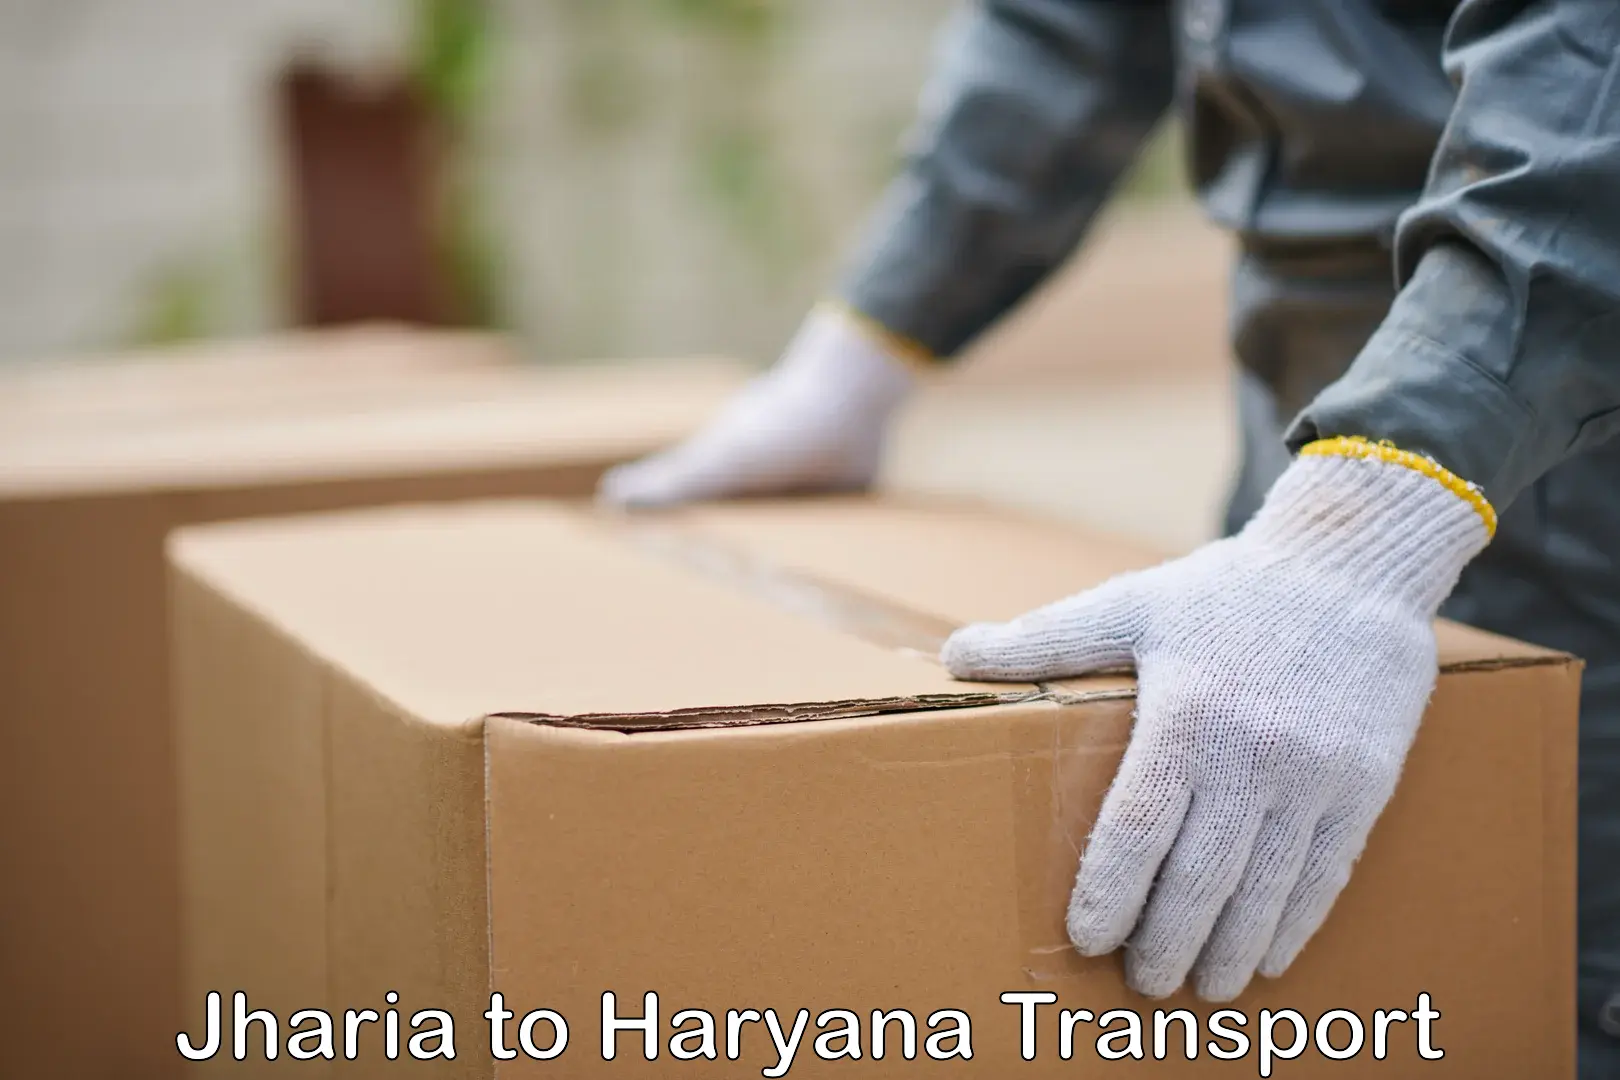 Online transport service Jharia to Haryana